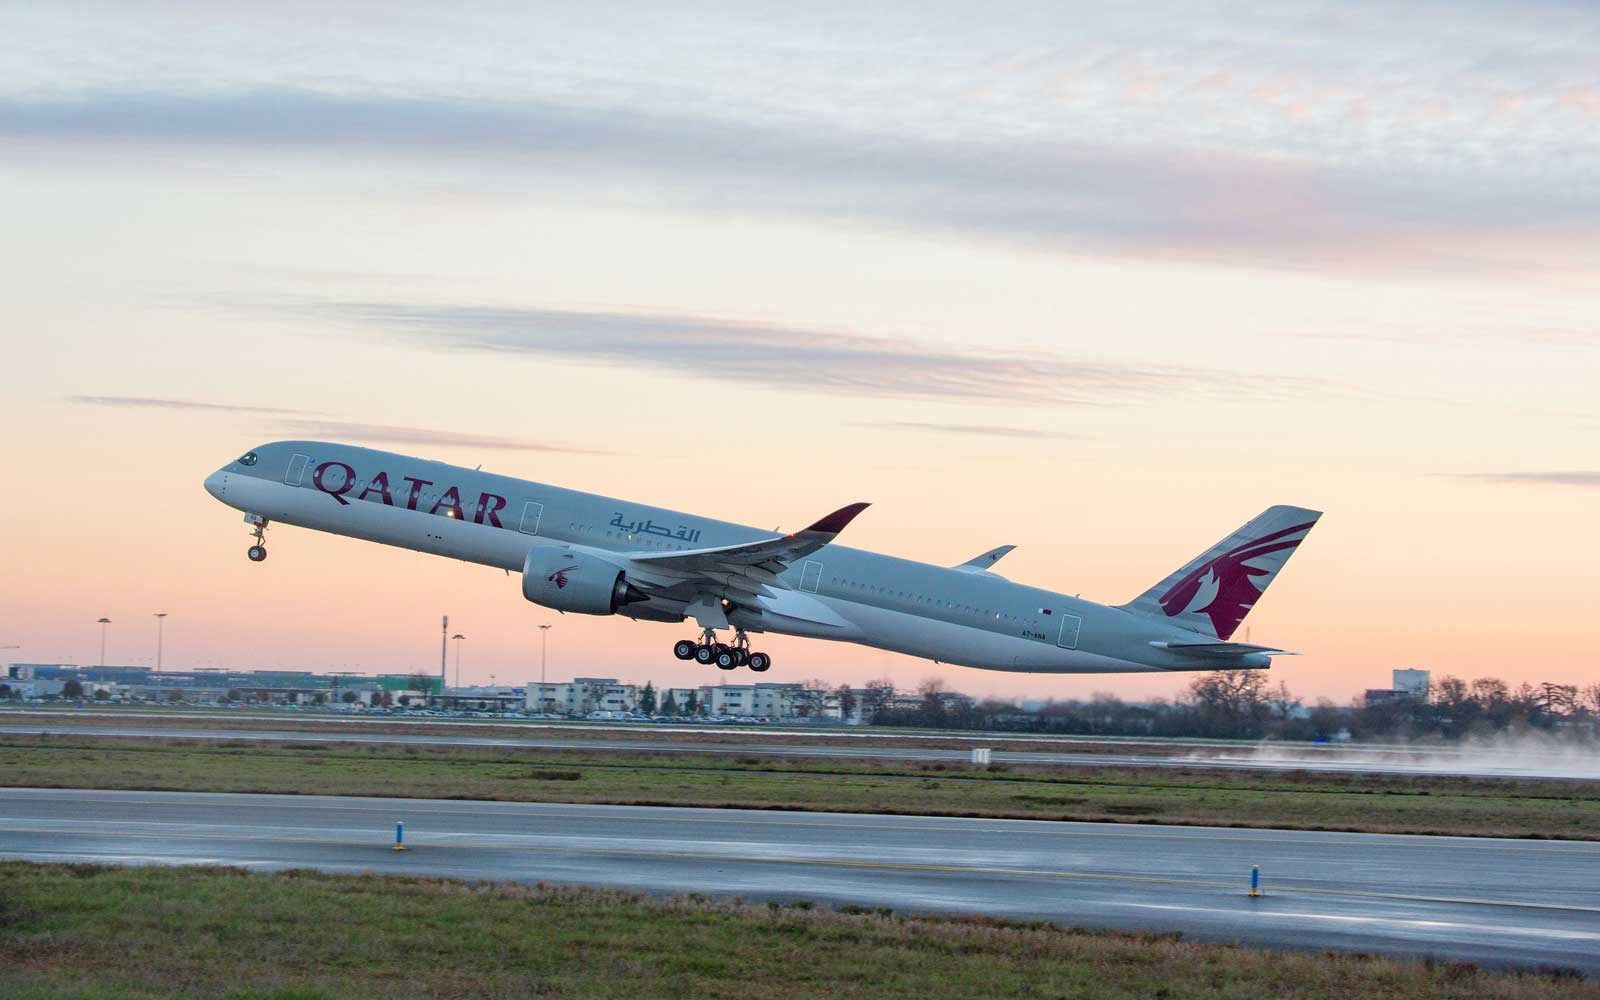 Qatar Just Unveiled The First A350 1000 It Could Put An End To Your In Flight Pet Peeves. Travel + Leisure